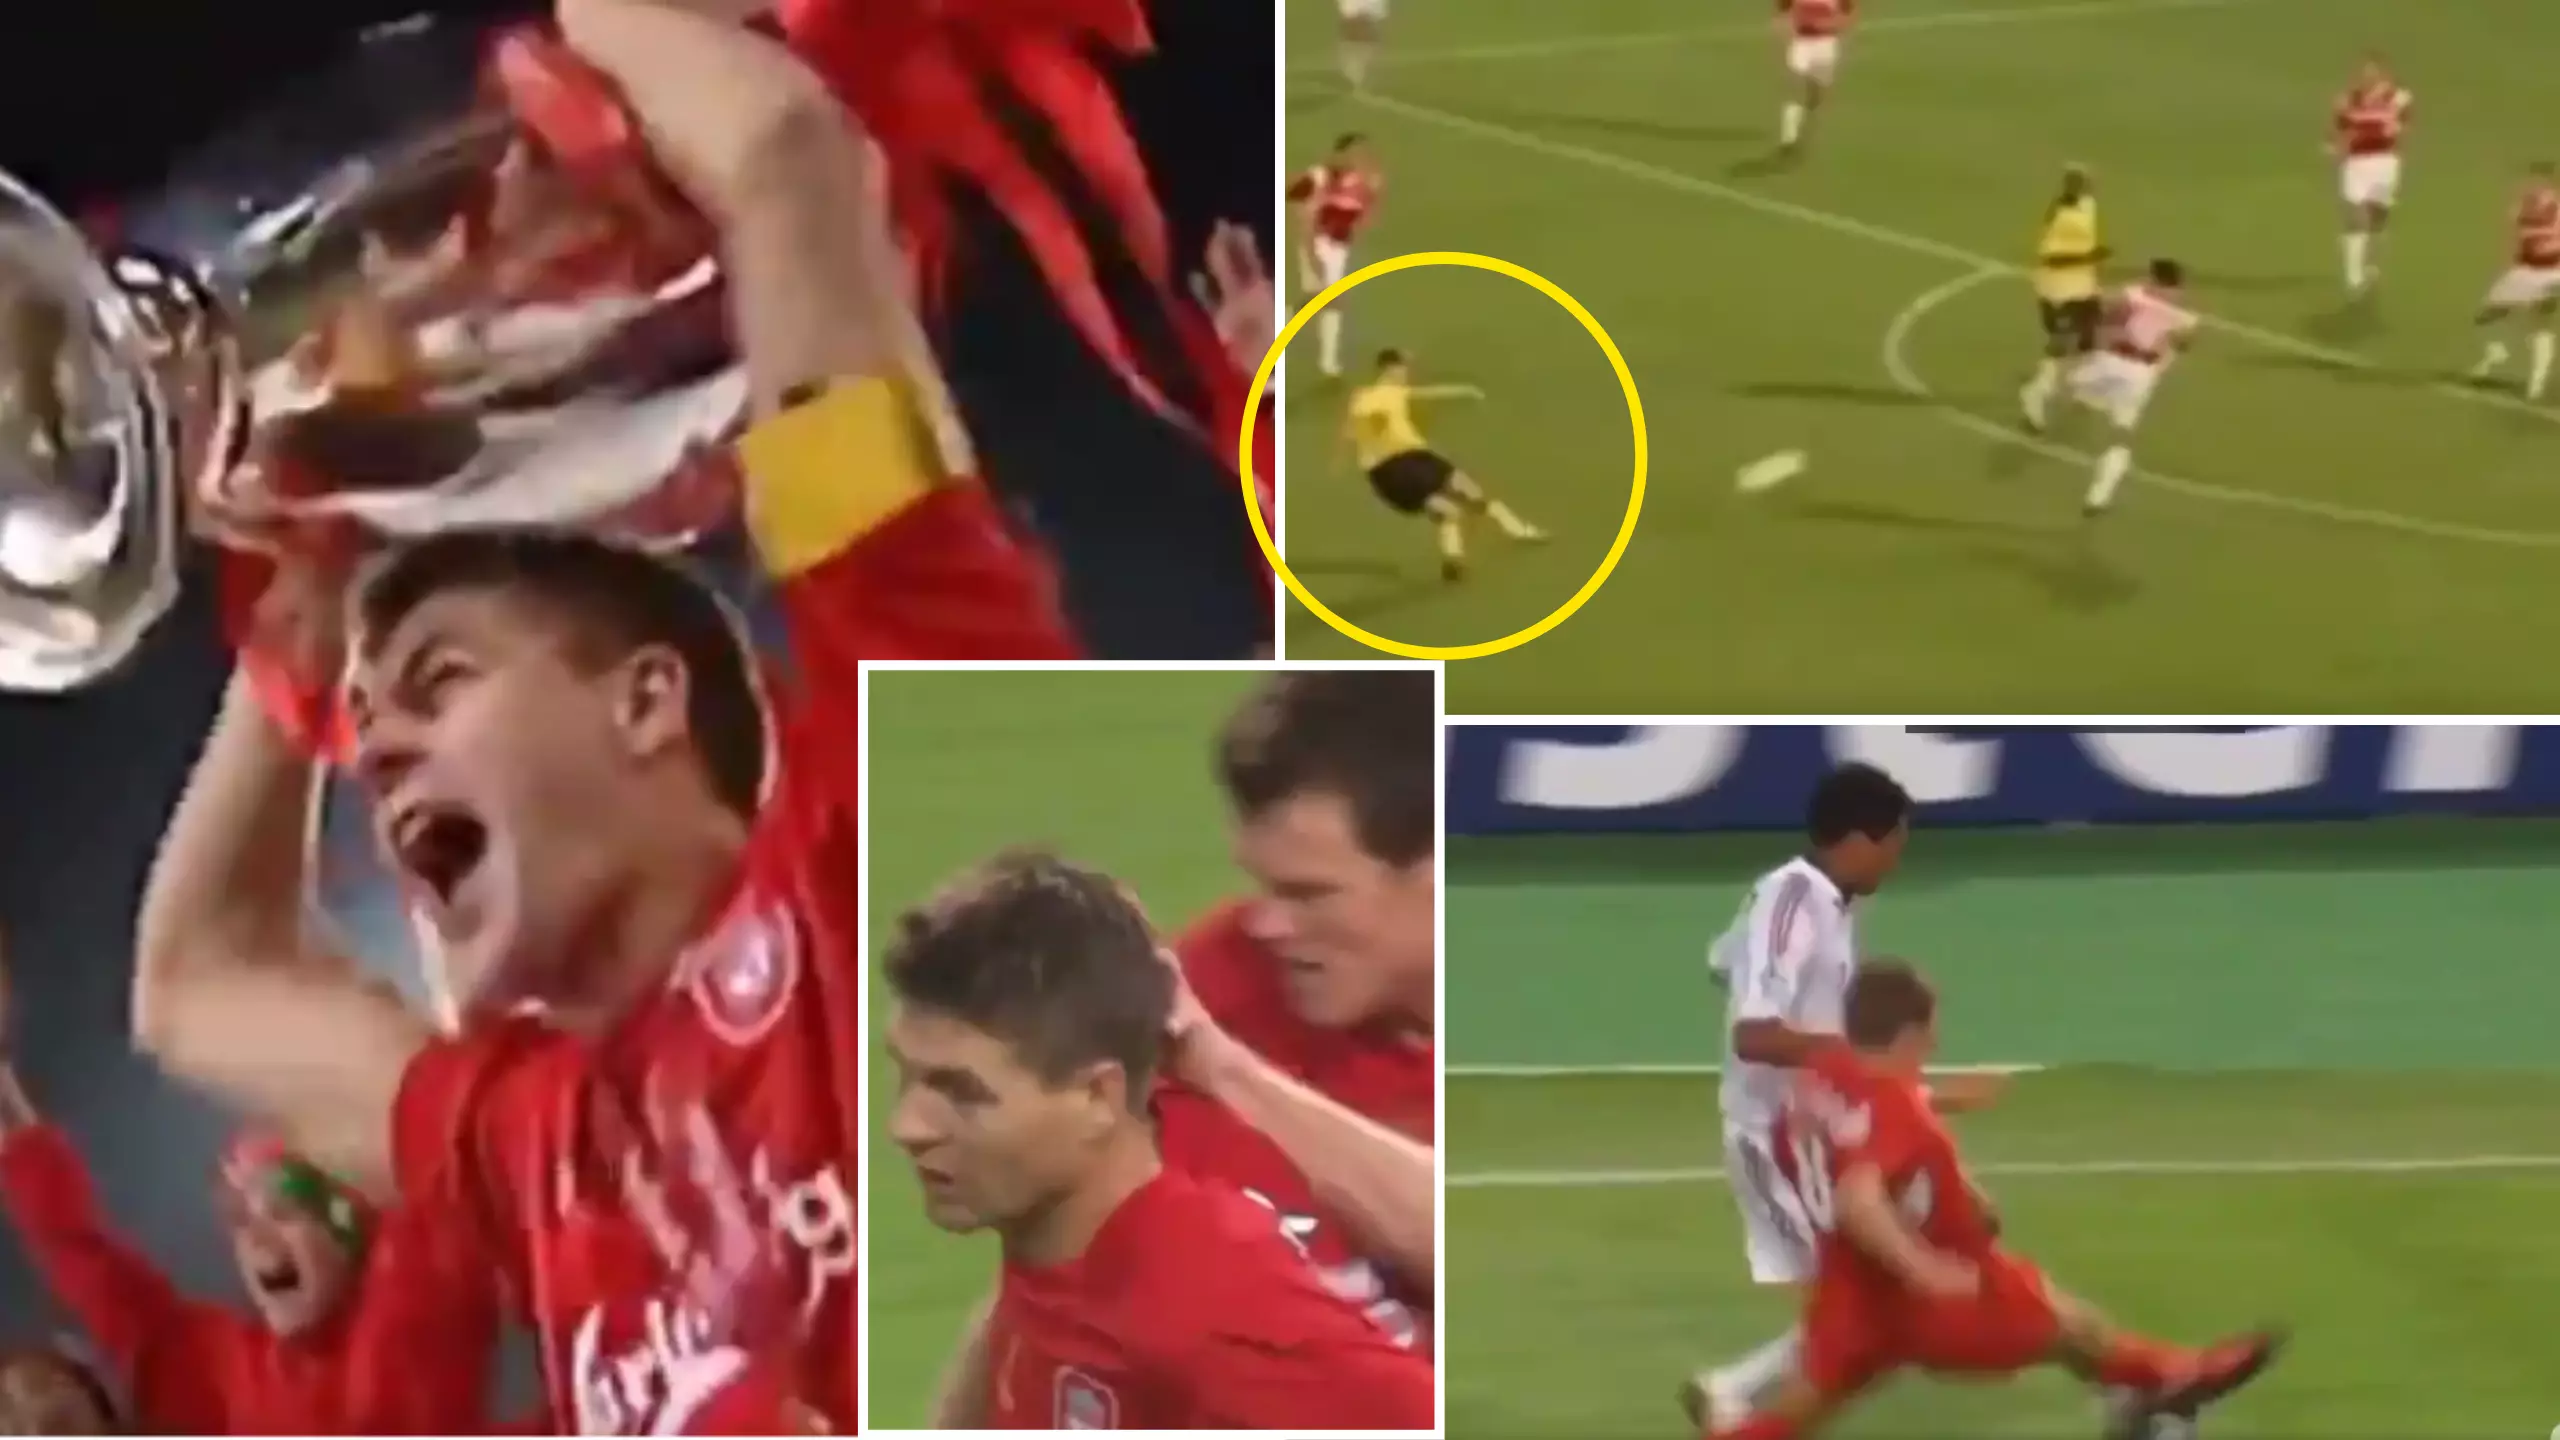 Steven Gerrard's 04/05 Champions League Highlights Are Extraordinary, He Was The World's Most Complete Midfielder